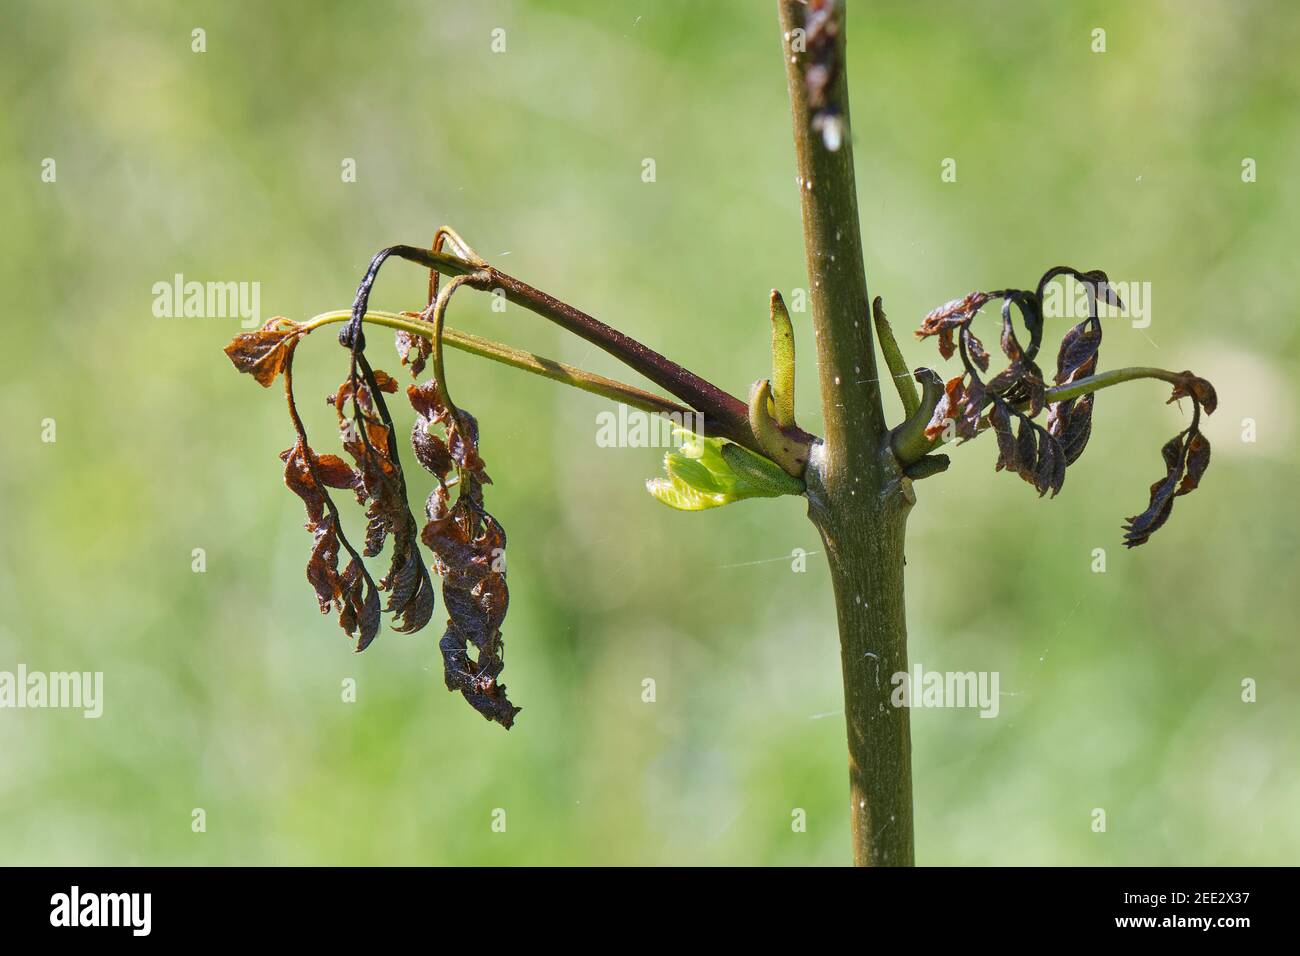 Ash tree (Fraxinus excelsior) sapling dying from Ash dieback disease (Hymenoscypus fraxineus) as its leaves wither, Wiltshire, UK, May. Stock Photo